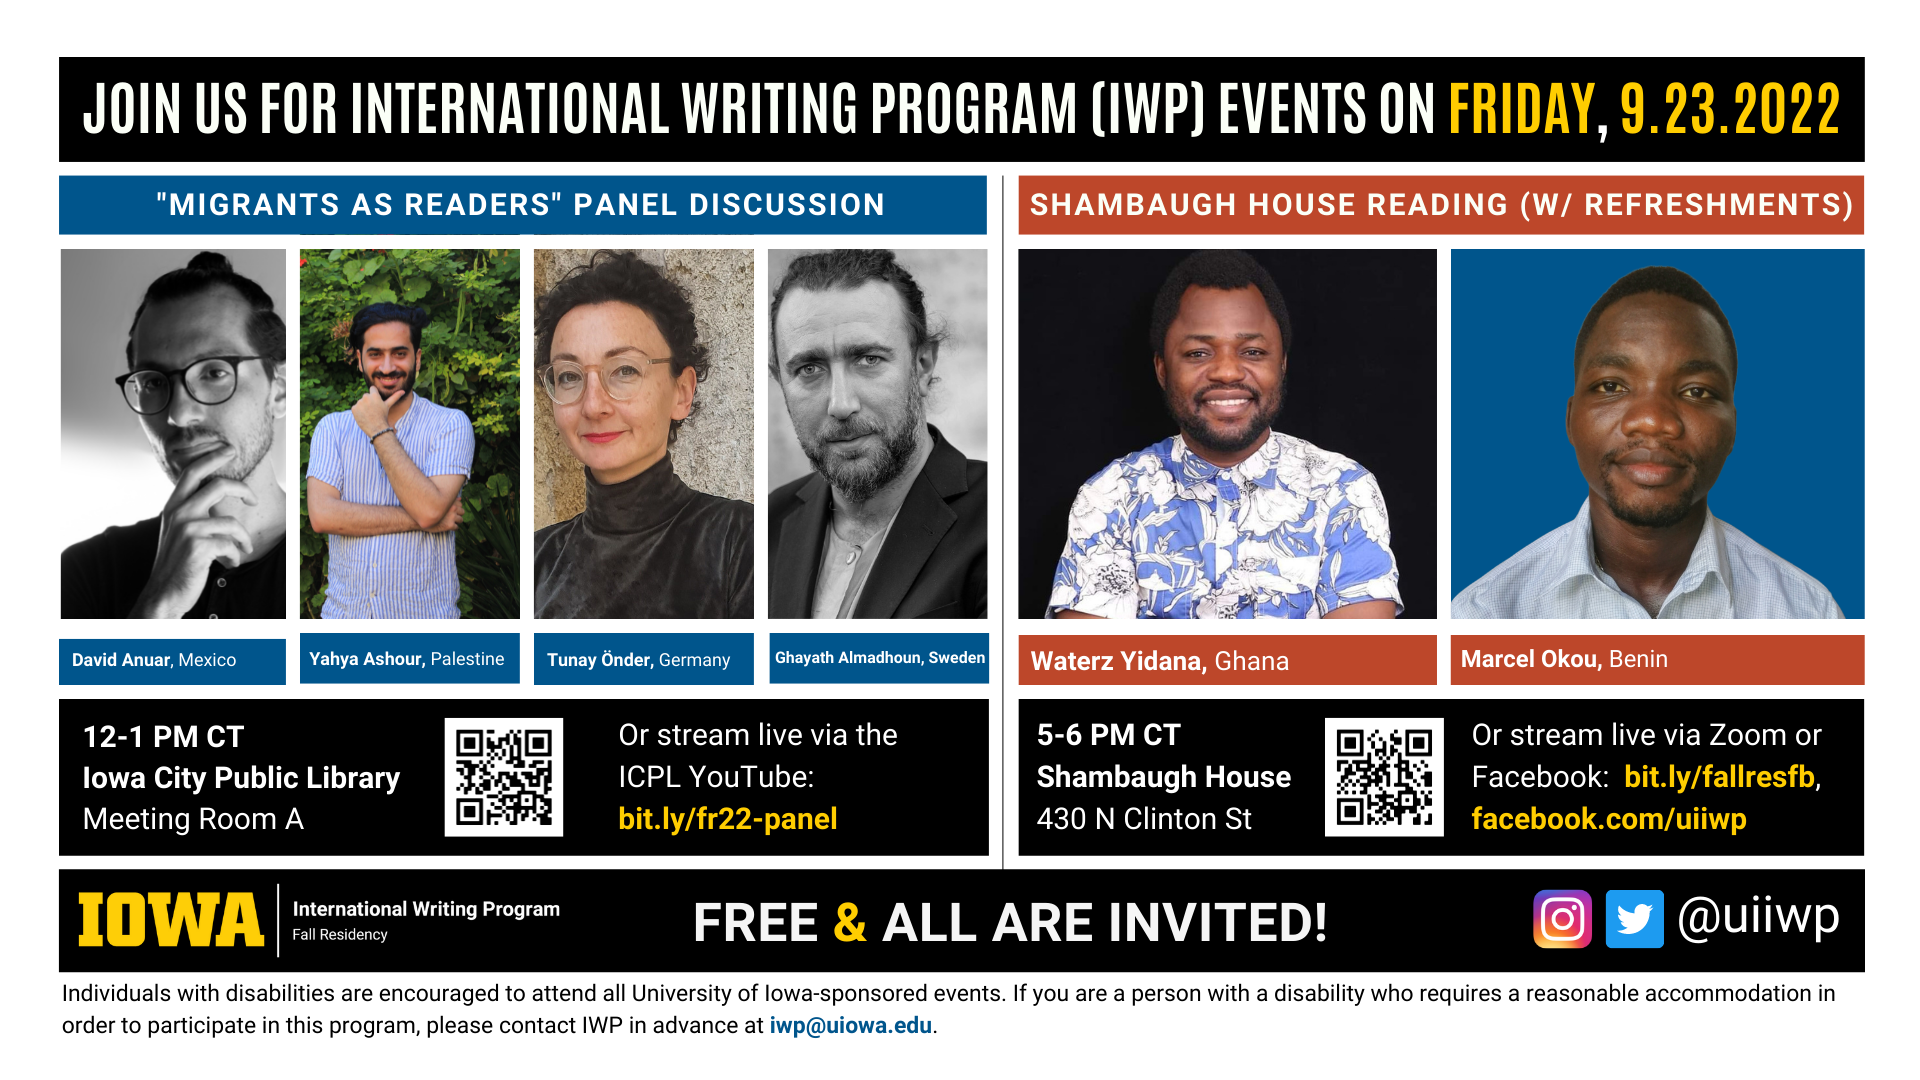 An image with two halves, each advertising one event. The image as a whole is labeled “Join us for International Writing Program (IWP) events on Friday, 9.23.2022.” The left half of the image is labeled, “’Migrants as Readers’ Panel Discussion.” There are portraits of four writers (named below) and the following text: "David Anuar, Mexico. Yahya Ashour, Palestine. TUnay Onder, Germany. Ghayath Almadhoun, Sweden. 12-1 PM CT, Iowa City Public Library, Meeting Room A. Or stream live via the ICPL YouTube: bit.ly/fr22-panel." The right half of the image is labeled “Shambaugh House Reading (W/ Refreshments.)” It features portraits of two writers (named below) and the following text: "Waterz Yidana, Ghana. Marcel Okou, Benin. 5-6 PM CT, Shambaugh House, 430 N. Clinton St. Or stream live via Zoom or Facebook:  bit.ly/fallresfb, facebook.com/uiiwp.” Below that text there are the IWP Fall Residency logo, the Instagram and Twitter handle @uiiwp, and a note that the event is “Free & All Are Invited.” The following text is at the bottom of the image: "Individuals with disabilities are encouraged to attend all University of Iowa-sponsored events. If you are a person with a disability who requires a reasonable accommodation in order to participate in this program, please contact IWP in advance at iwp@uiowa.edu.